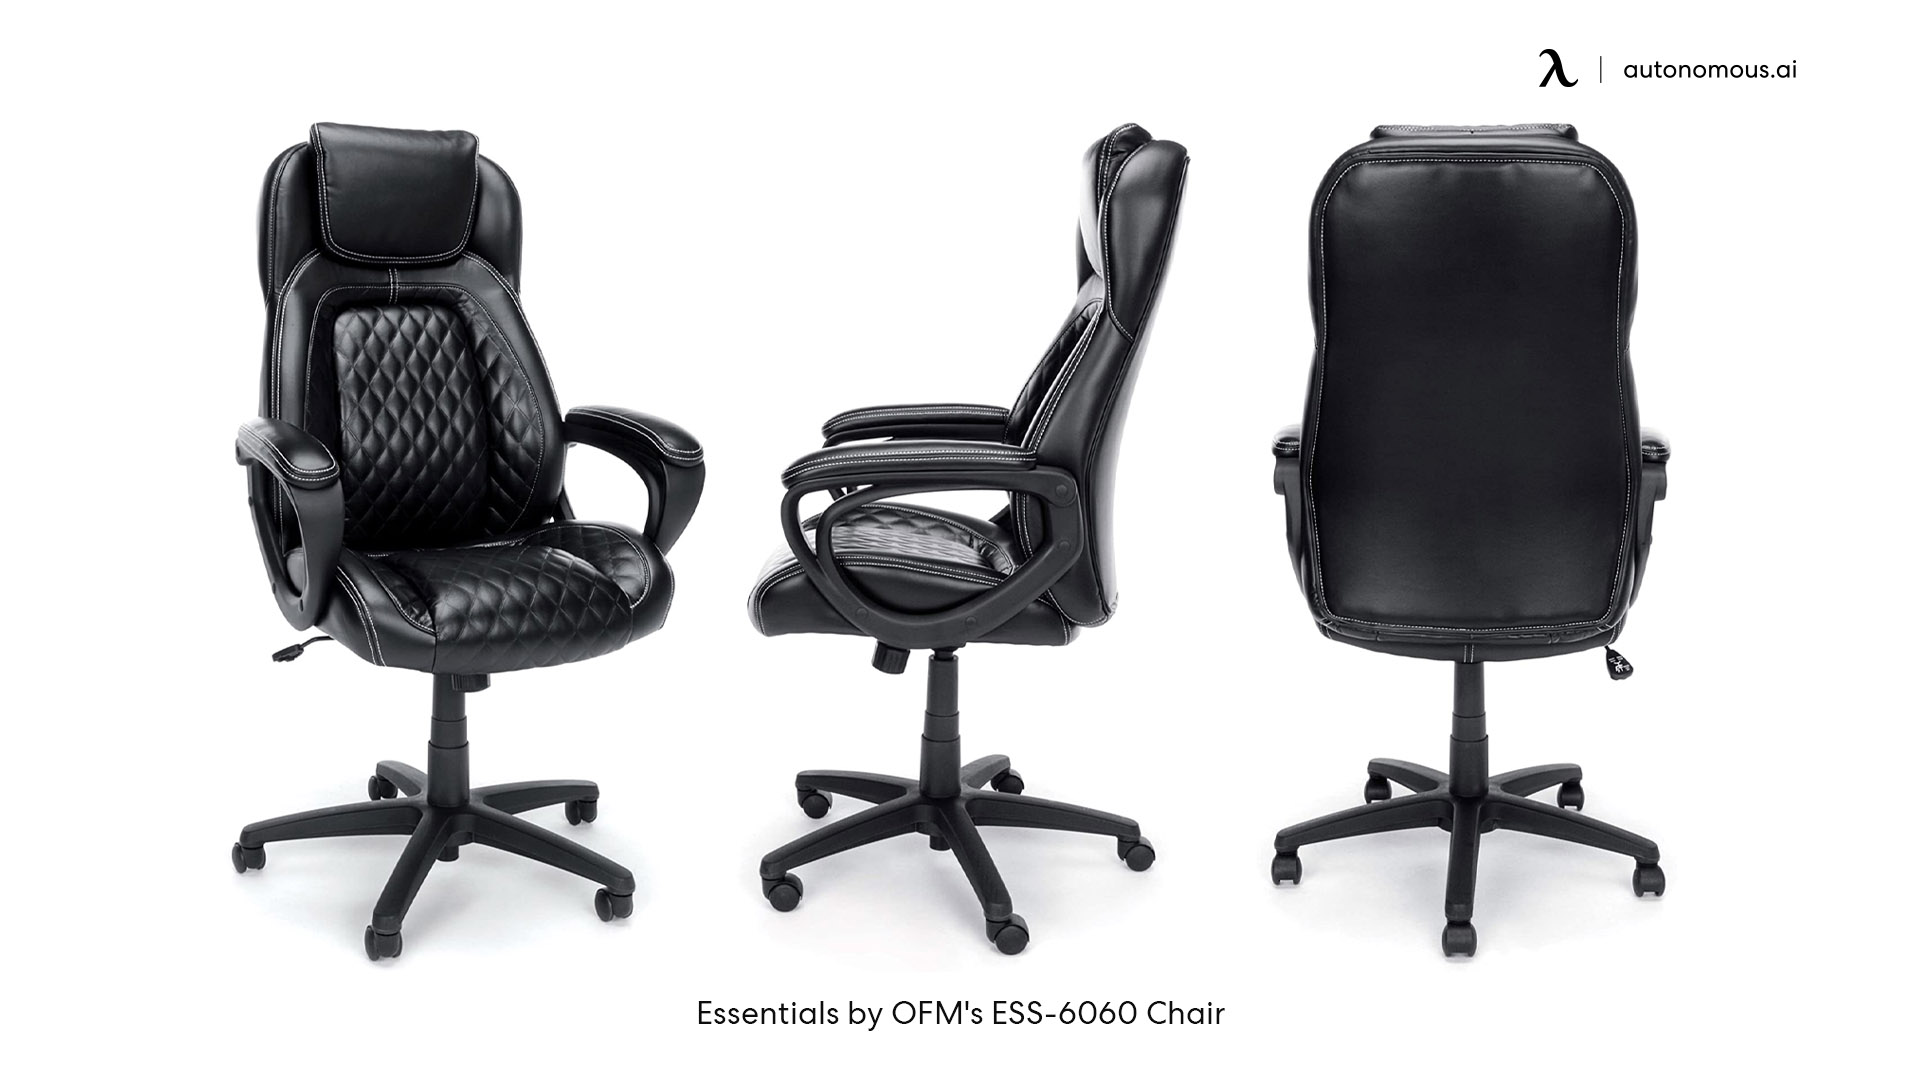 OFM's ESS-6060 high back home office chair